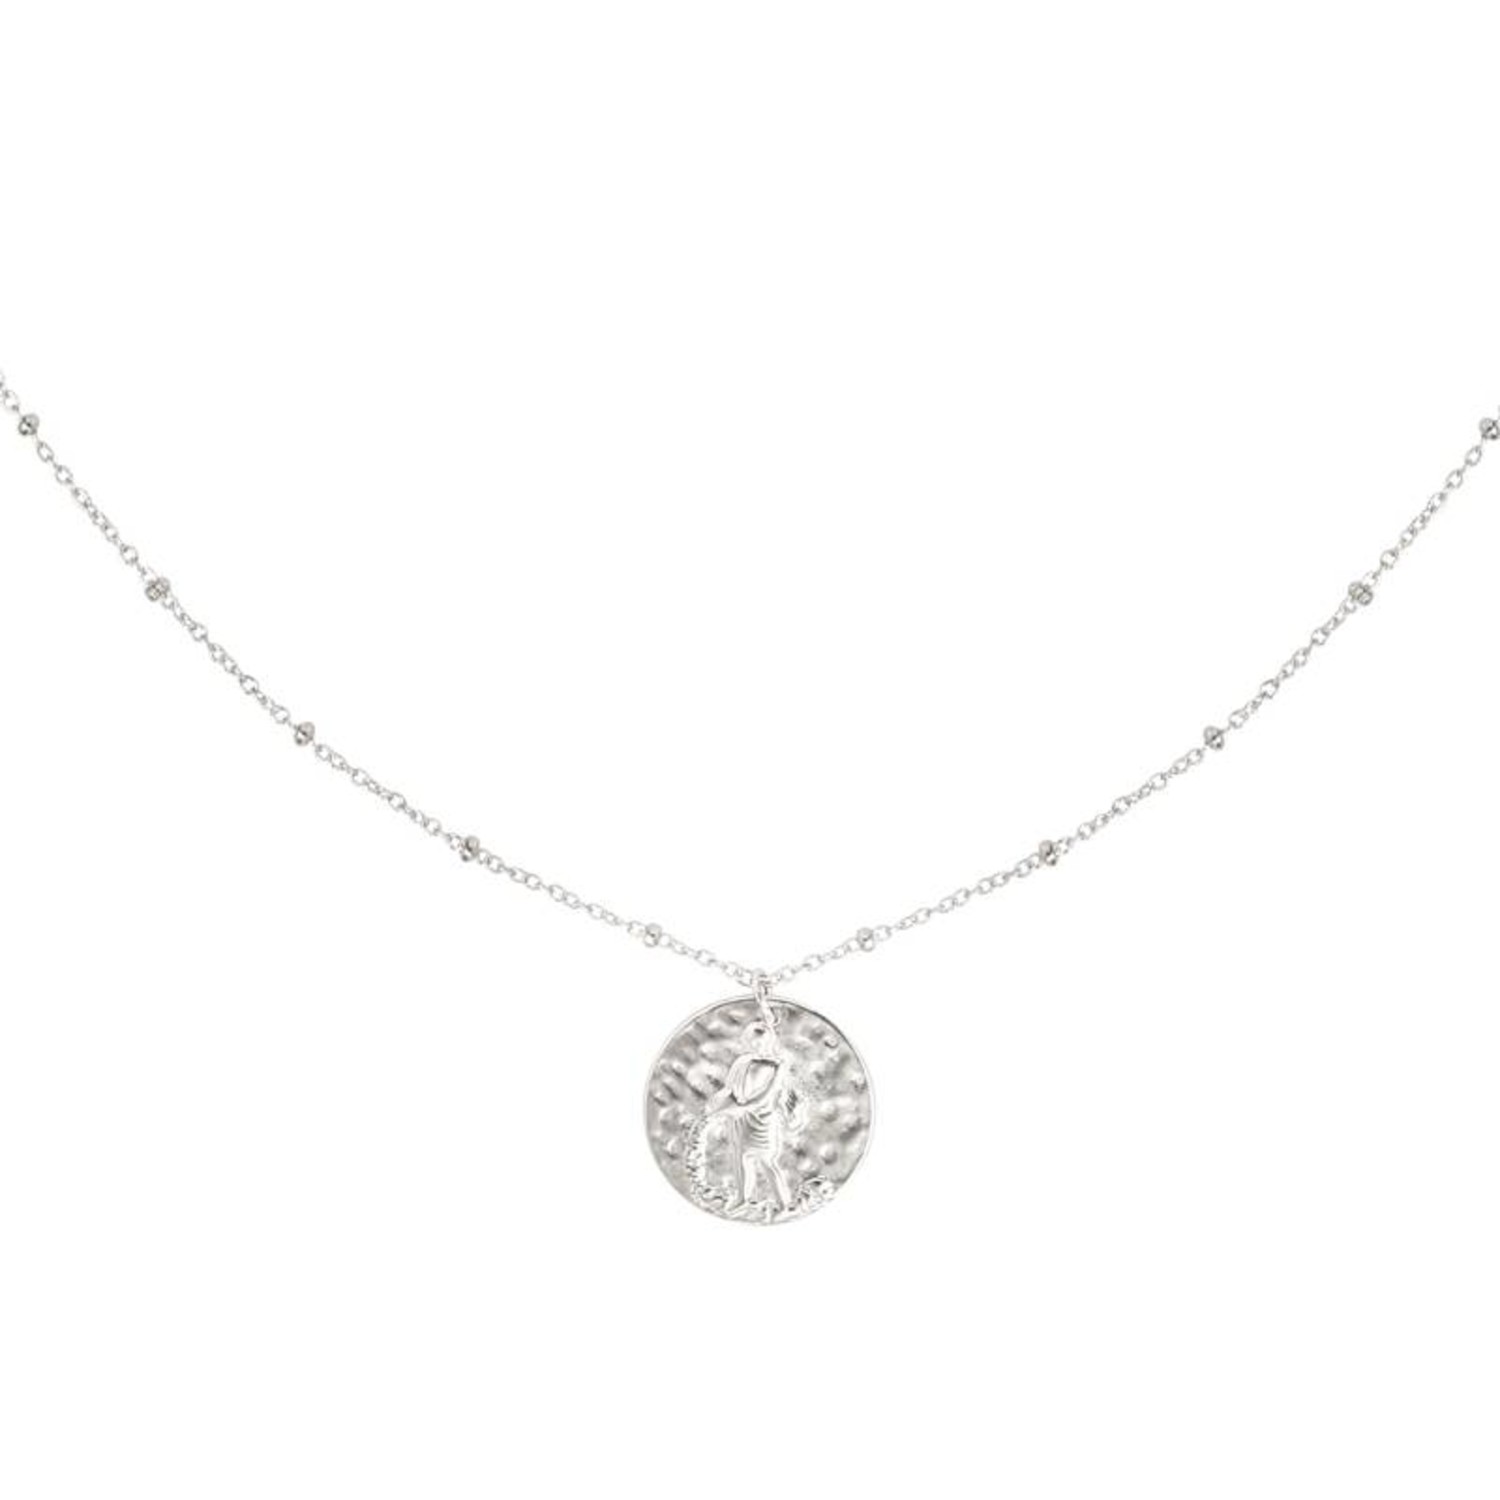 Amazon.com: Sterling Silver Zodiac Sign Cancer Pendant Necklace, The Crab  Astrological Sign (Jun 21 - Jul 22), 13/16 in. (21mm) Wide : Clothing,  Shoes & Jewelry